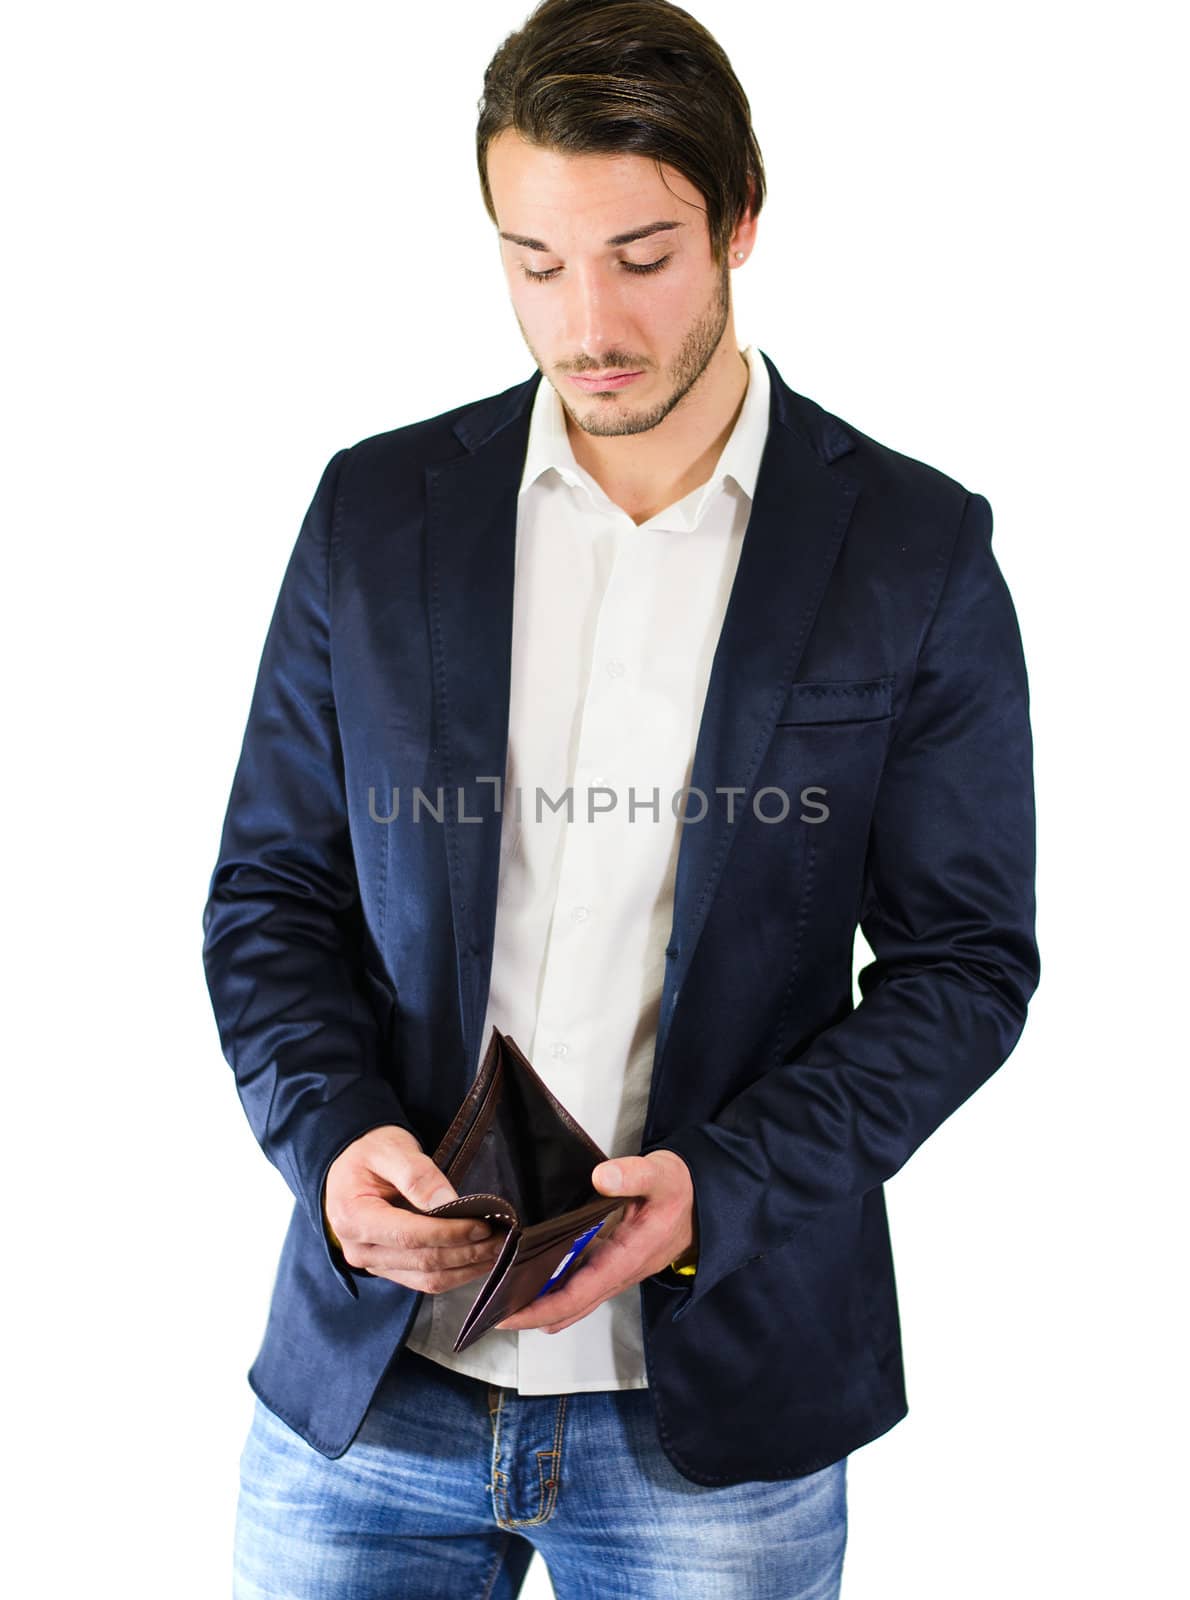 Unhappy, worried guy looking at empty wallet by artofphoto